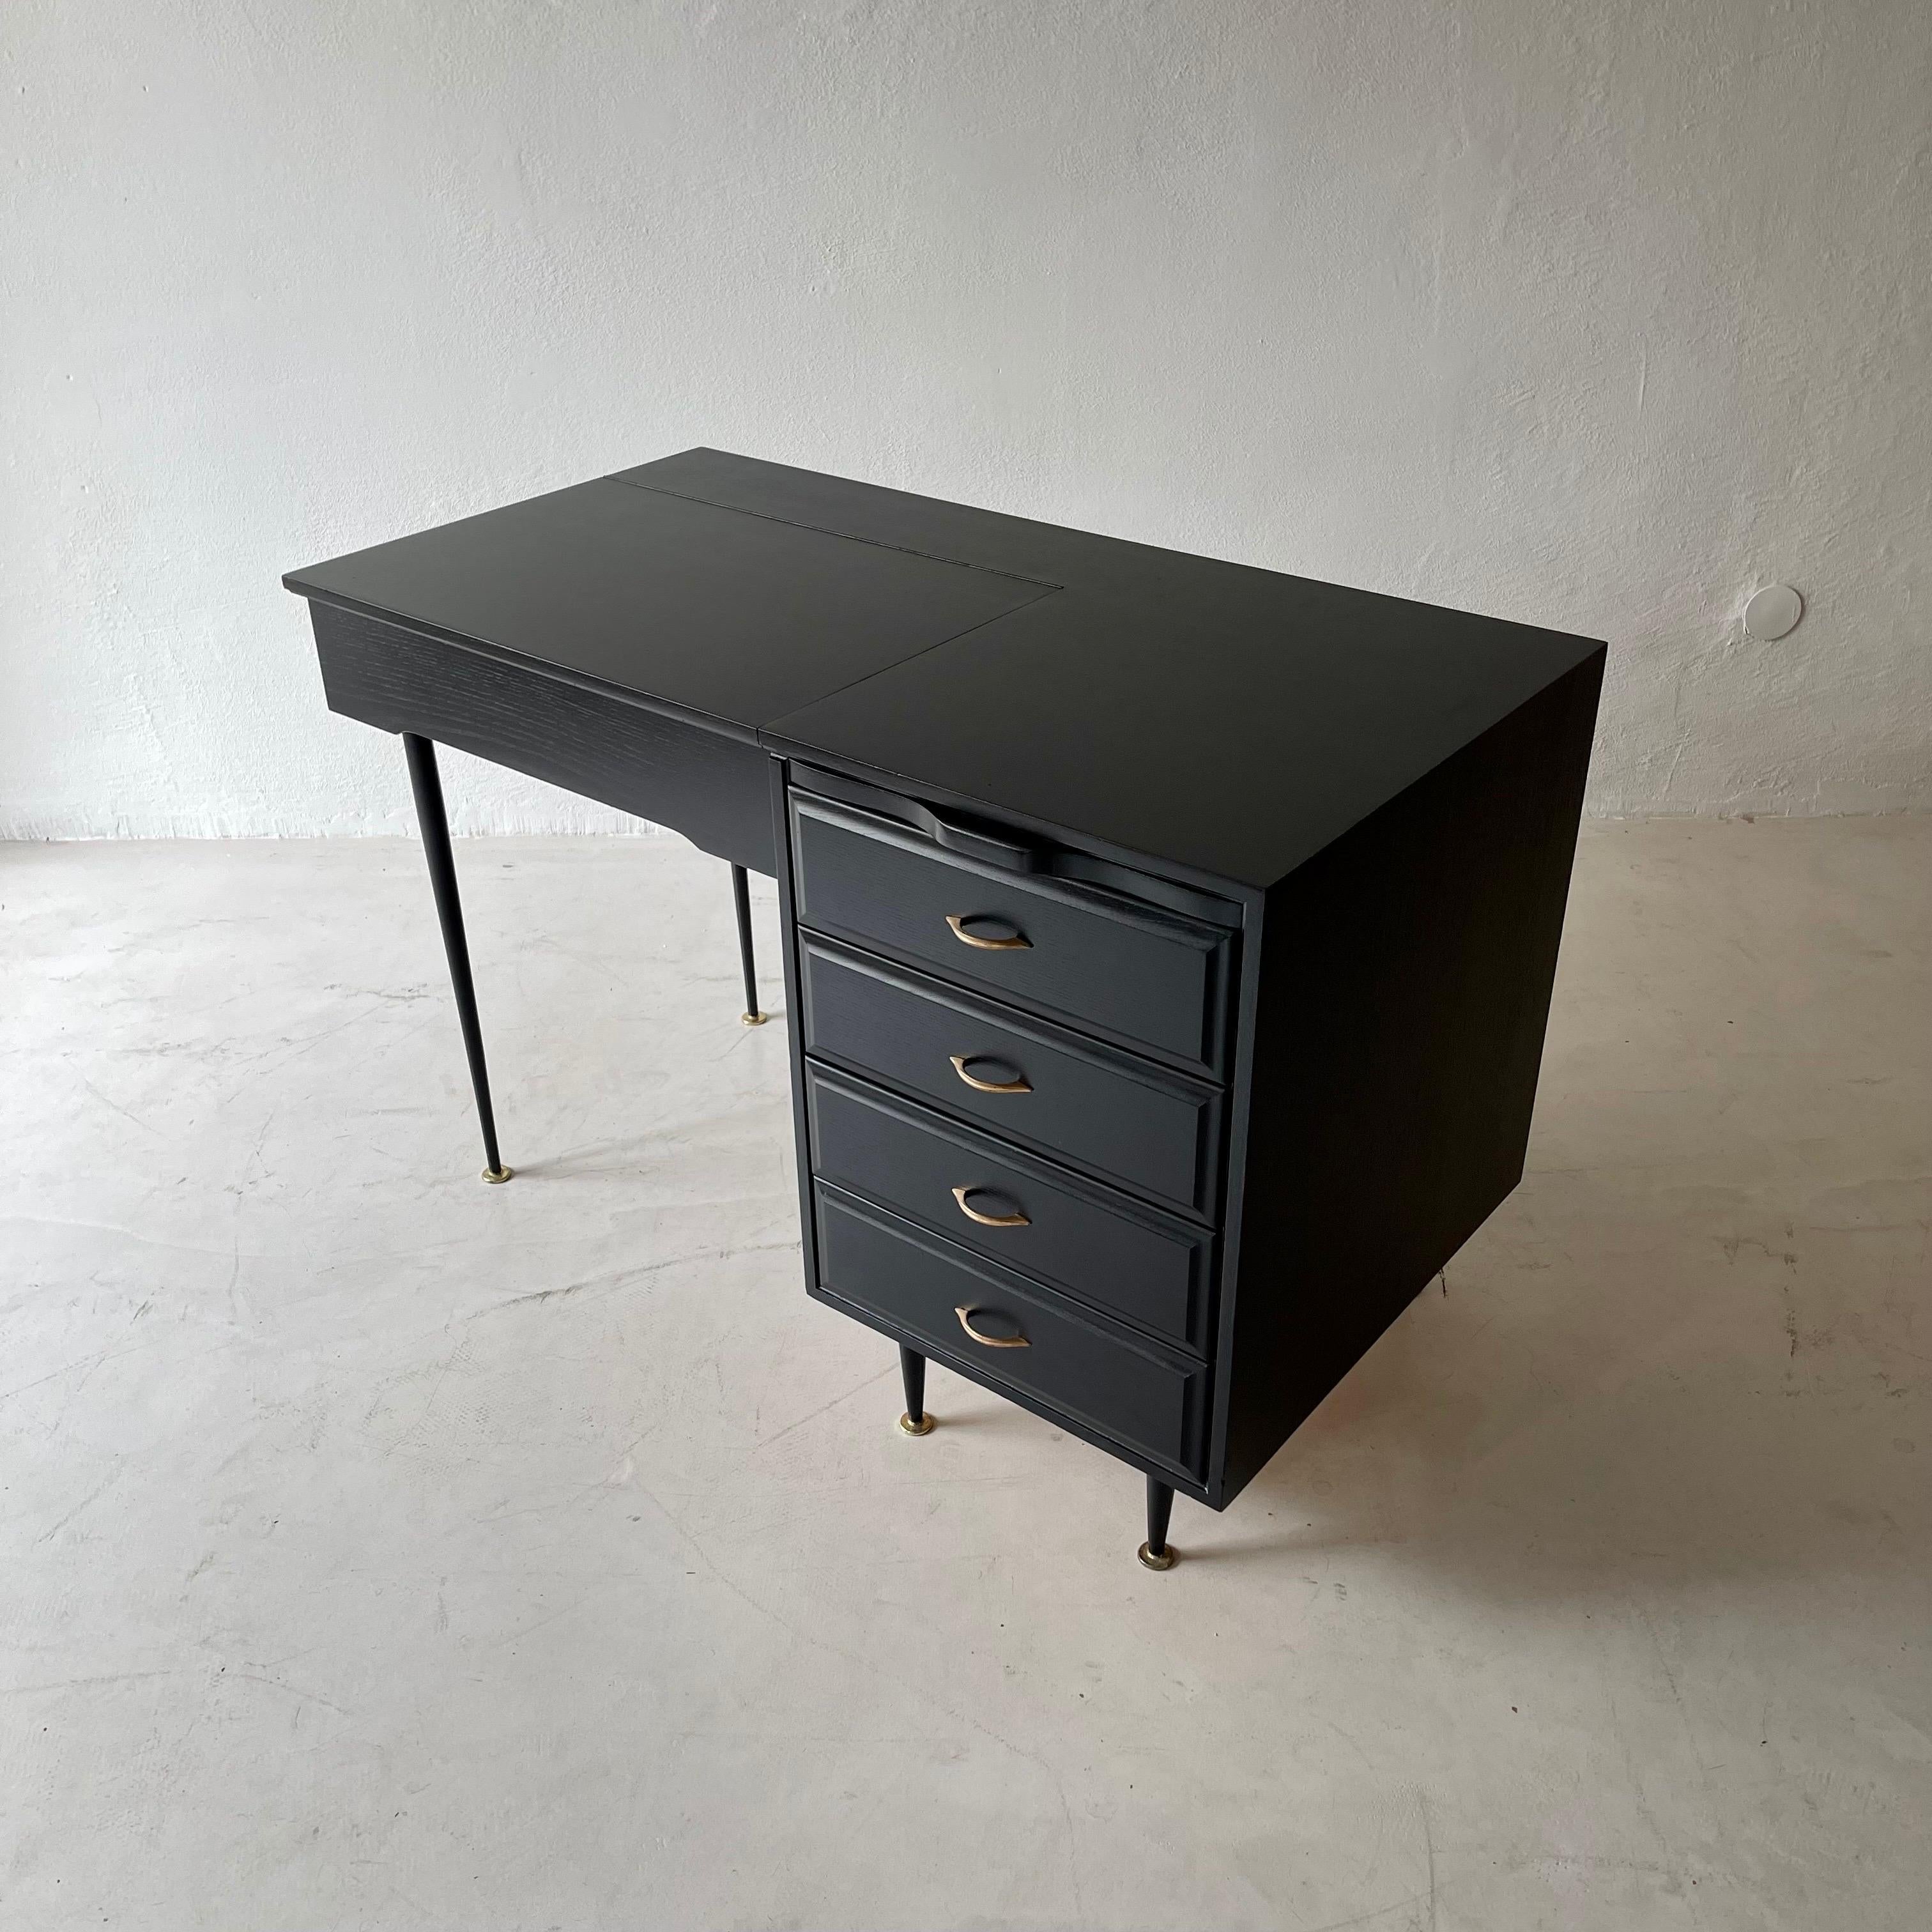 Blackened Writing Desk 1950s with mirror and drawers standing on black metal legs with gold colored details.